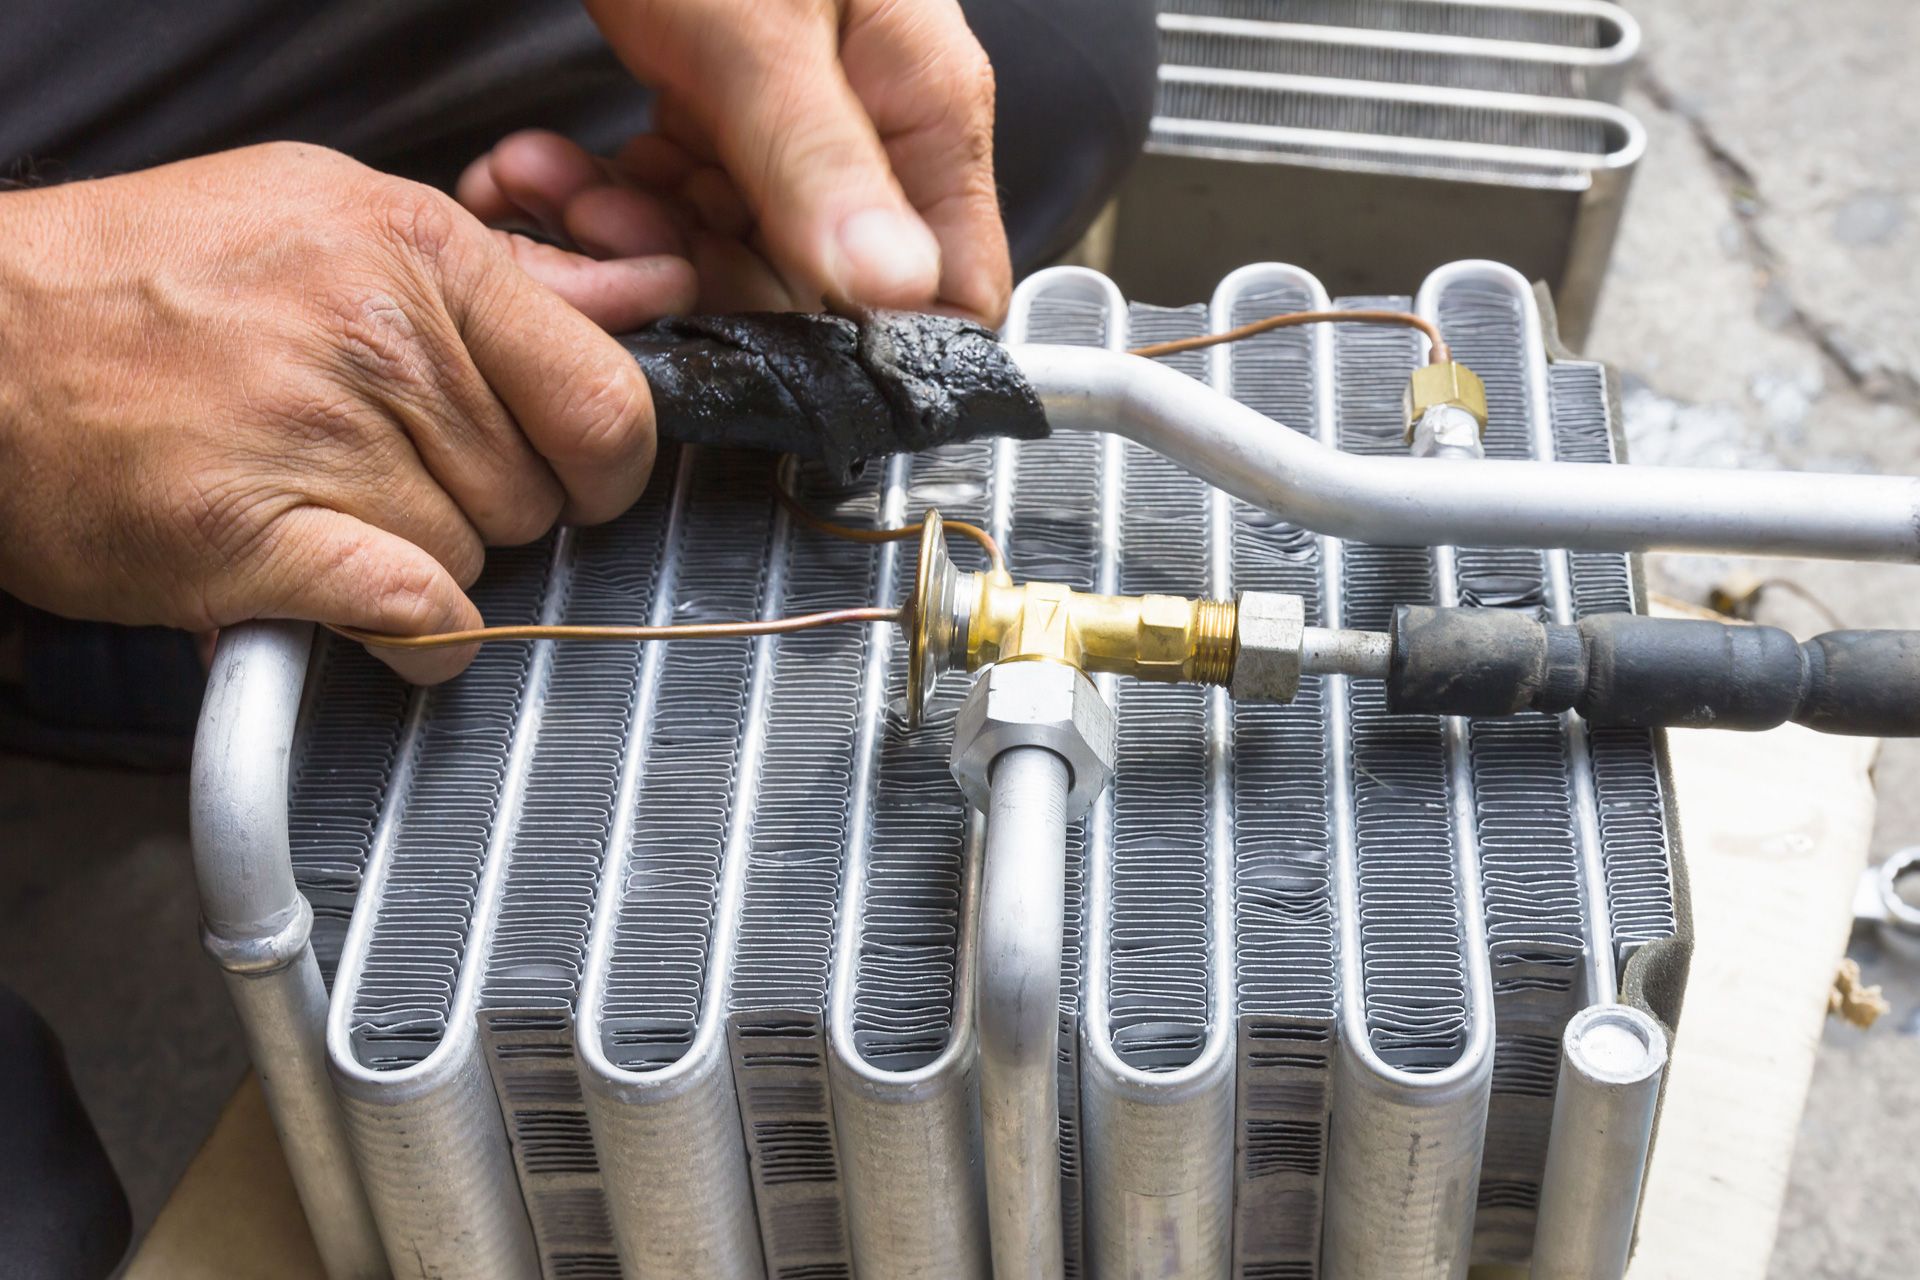 a man is working on a radiator with a hose attached to it